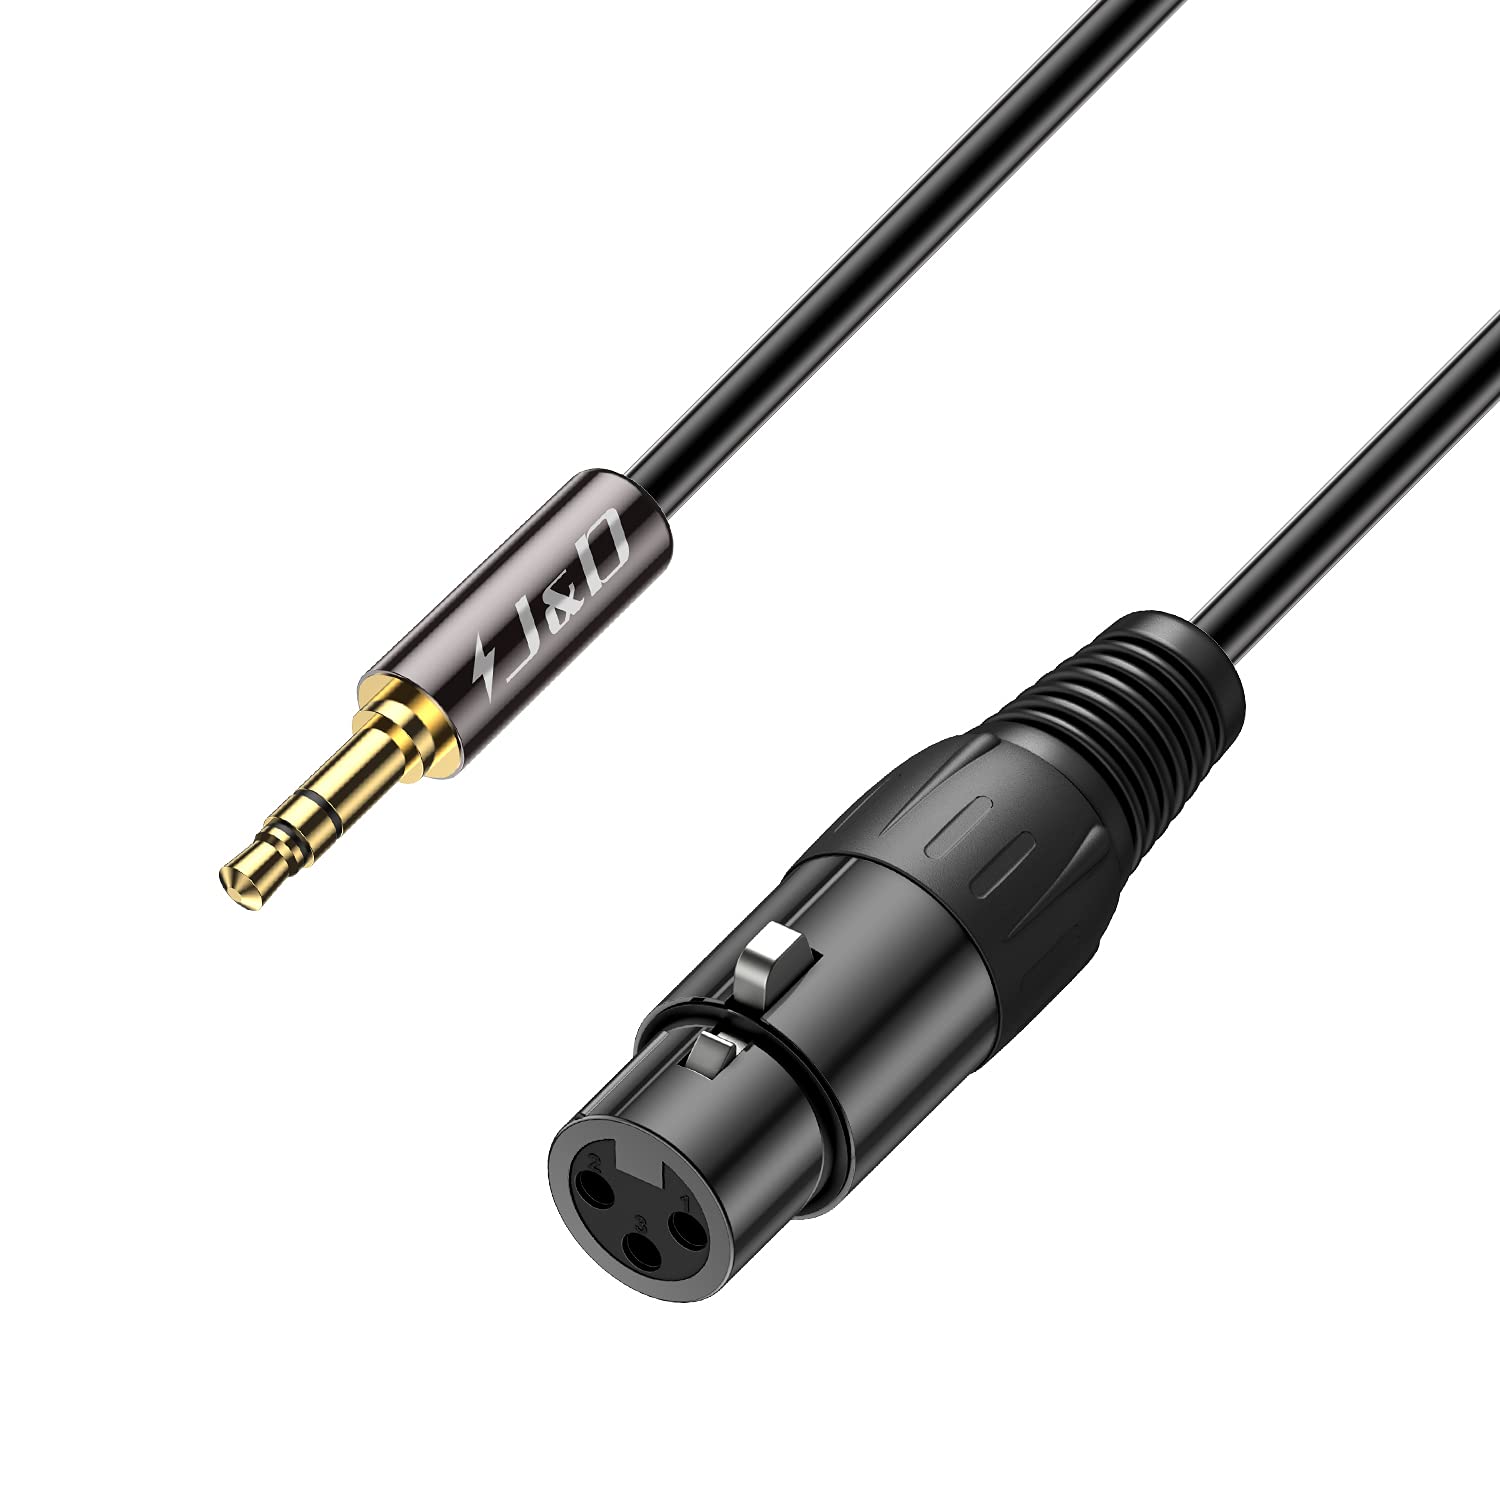 J&D TRS 3.5mm to XLR Cable, PVC Shelled 3.5mm 1/8 inch TRS male to XLR Female Balanced Cable XLR to TRS 1/8 inch Adapter Audio Cable for DSLR Camera